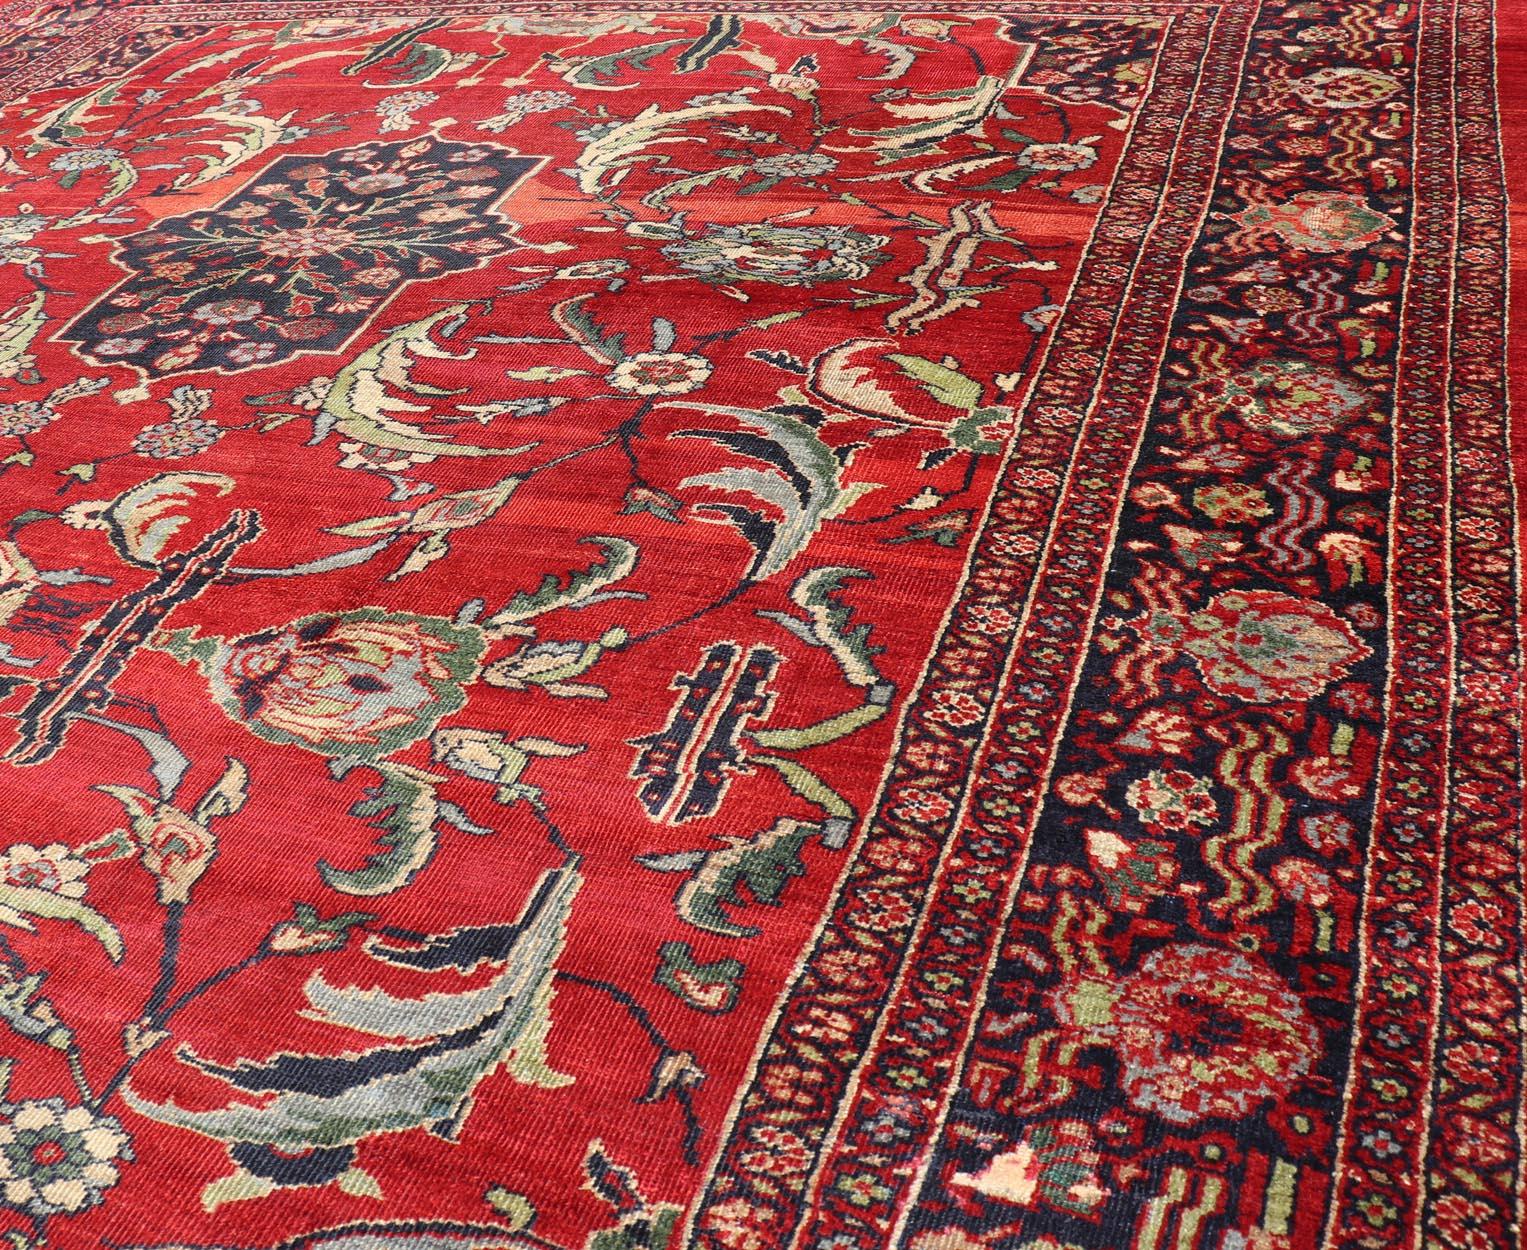 Antique Persian Zeigler Sultanabad Rug with Botanical Elements Set on Red Field For Sale 9